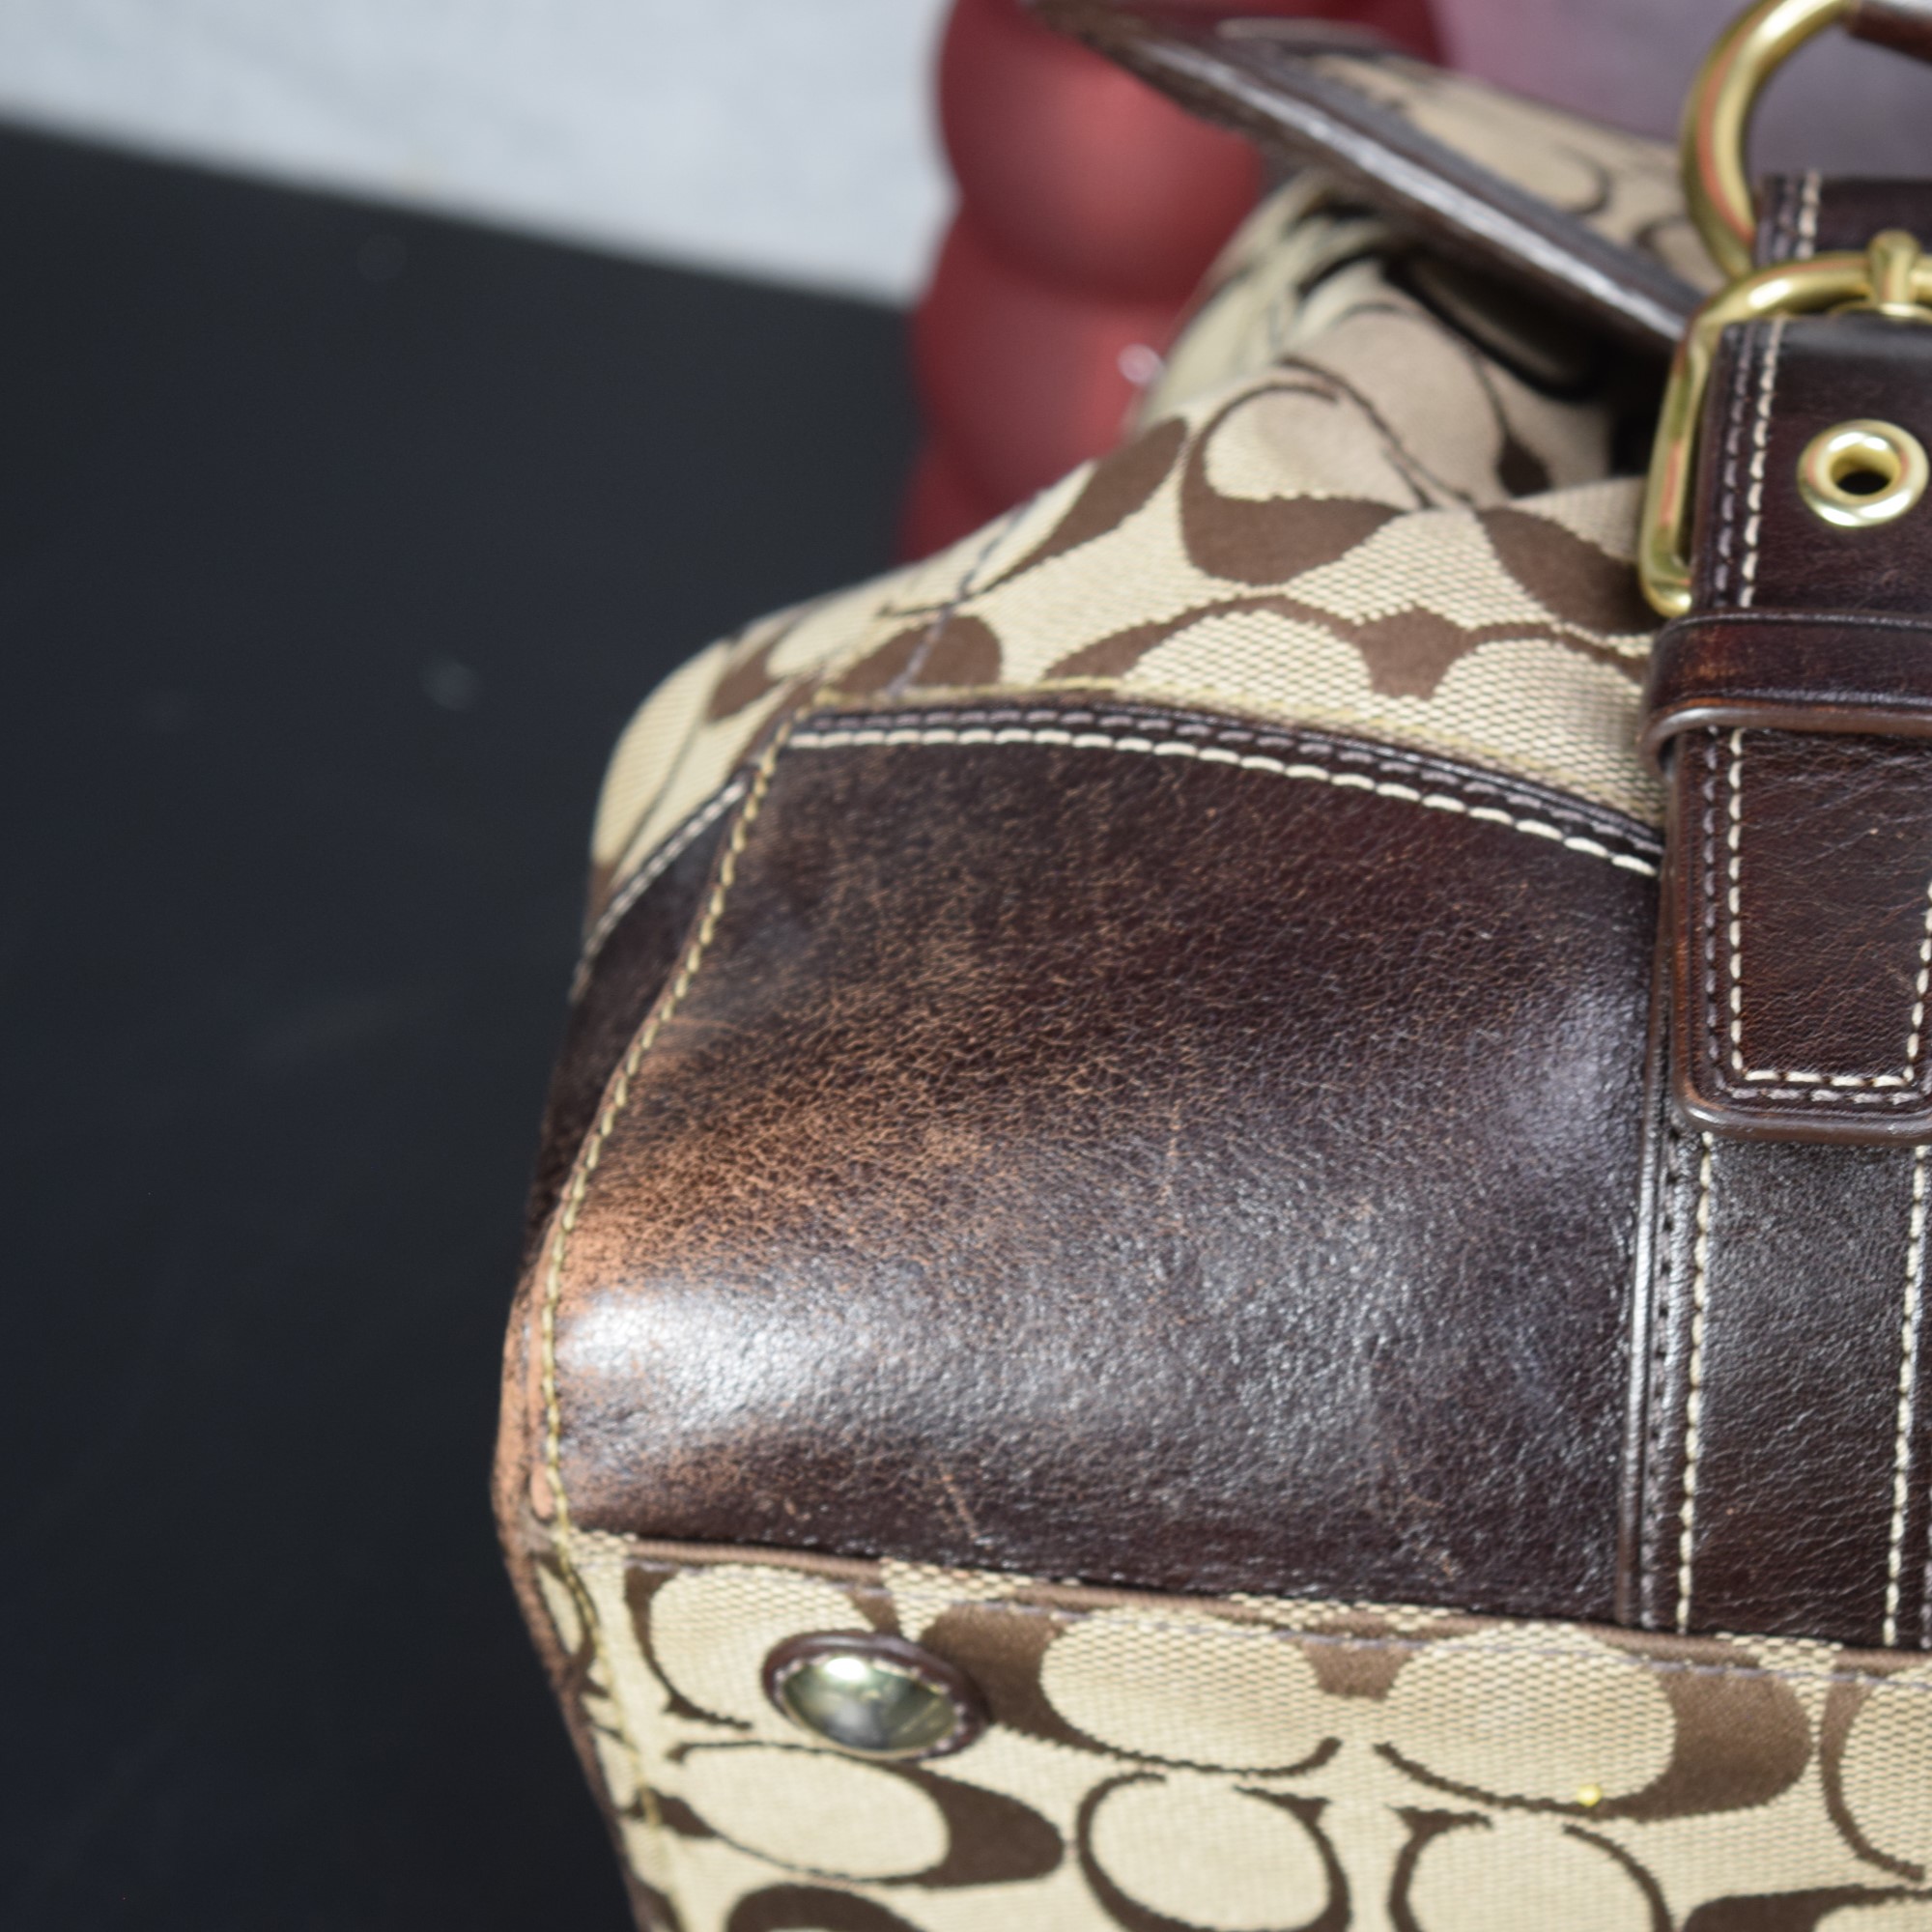 Coach Flap Bag | Abba House Thrift Store of Perry, GA